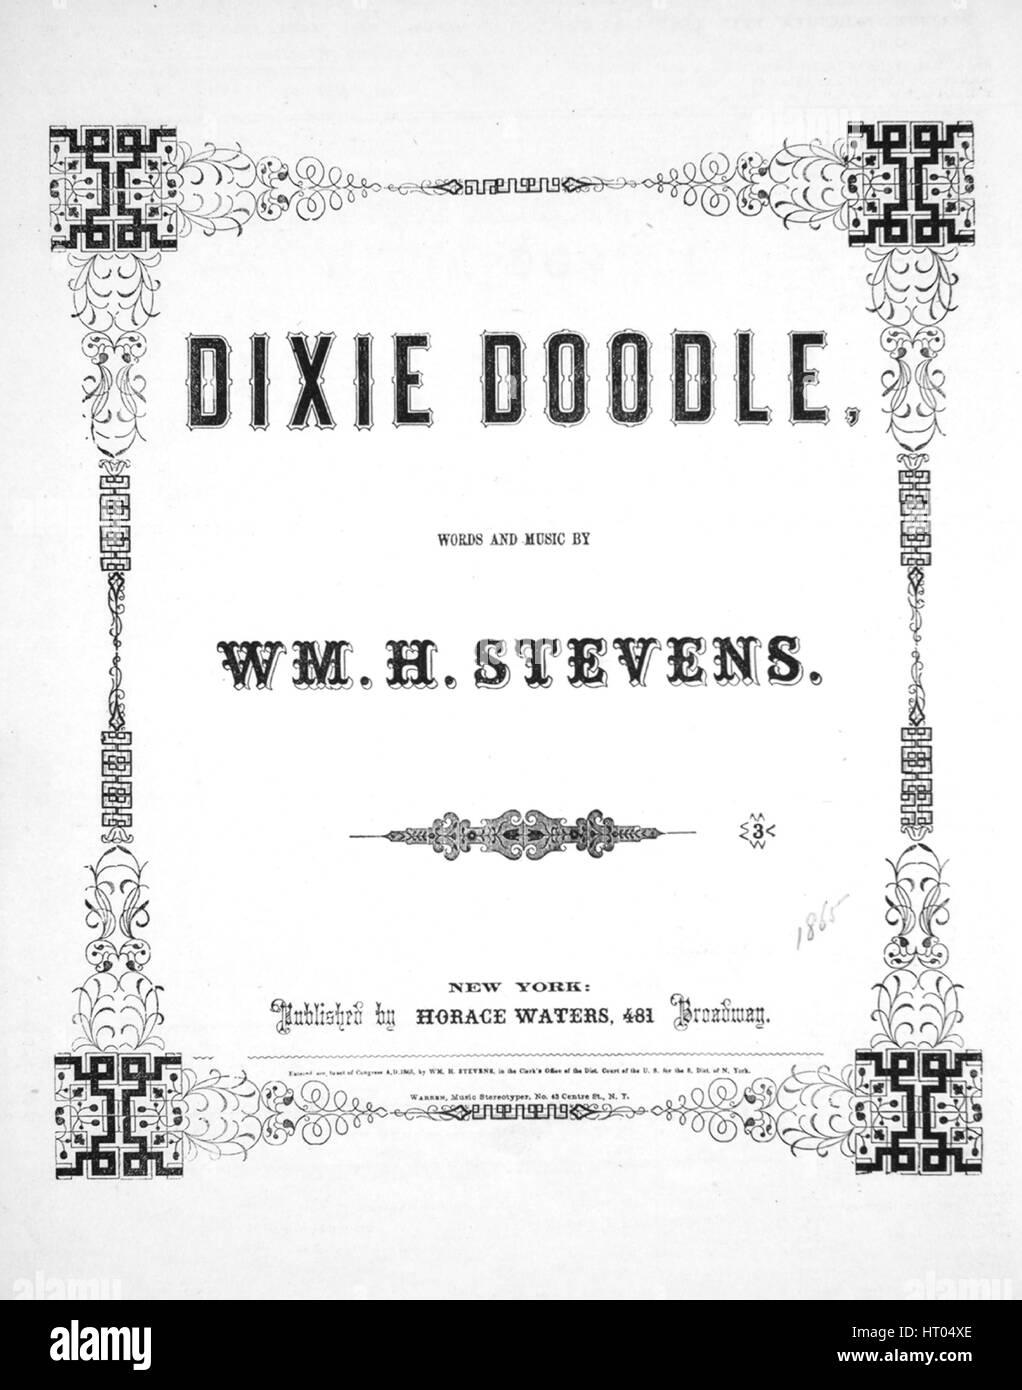 Sheet music cover image of the song 'Dixie Doodle', with original authorship notes reading 'Words and Music by Wm H Stevens', United States, 1865. The publisher is listed as 'Horace Waters, 481 Broadway', the form of composition is 'strophic with chorus', the instrumentation is 'piano and voice', the first line reads 'Uncle Sam, with Gen'ral Grant, and Yankee Doodle Dandy', and the illustration artist is listed as 'Warren, Music Stereotyper, no. 43 Centre St., N.Y.'. Stock Photo